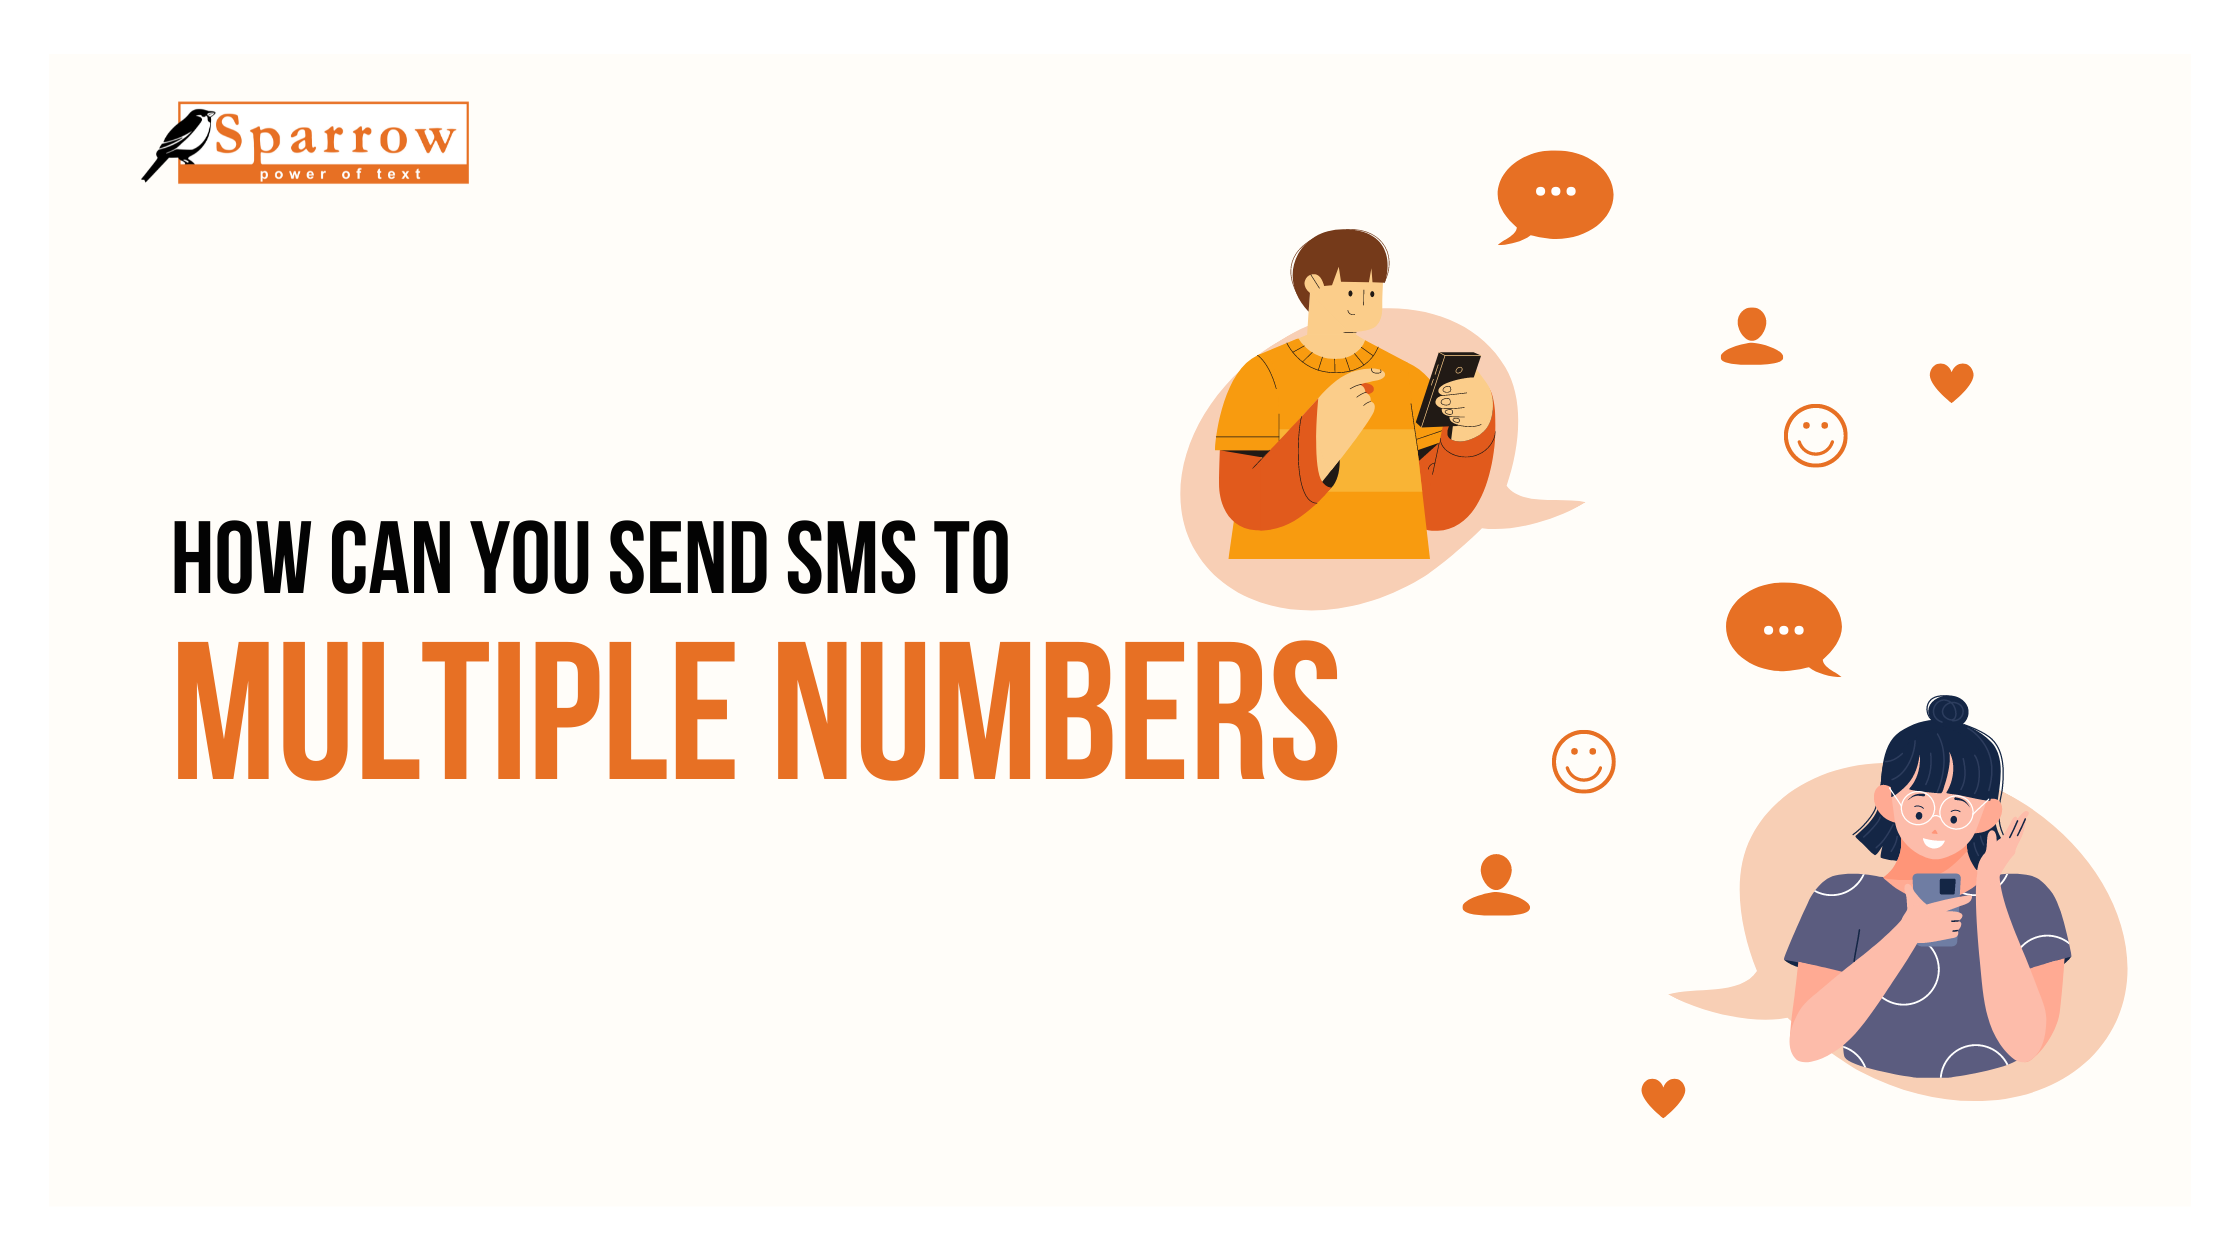 How to send SMS to multiple numbers